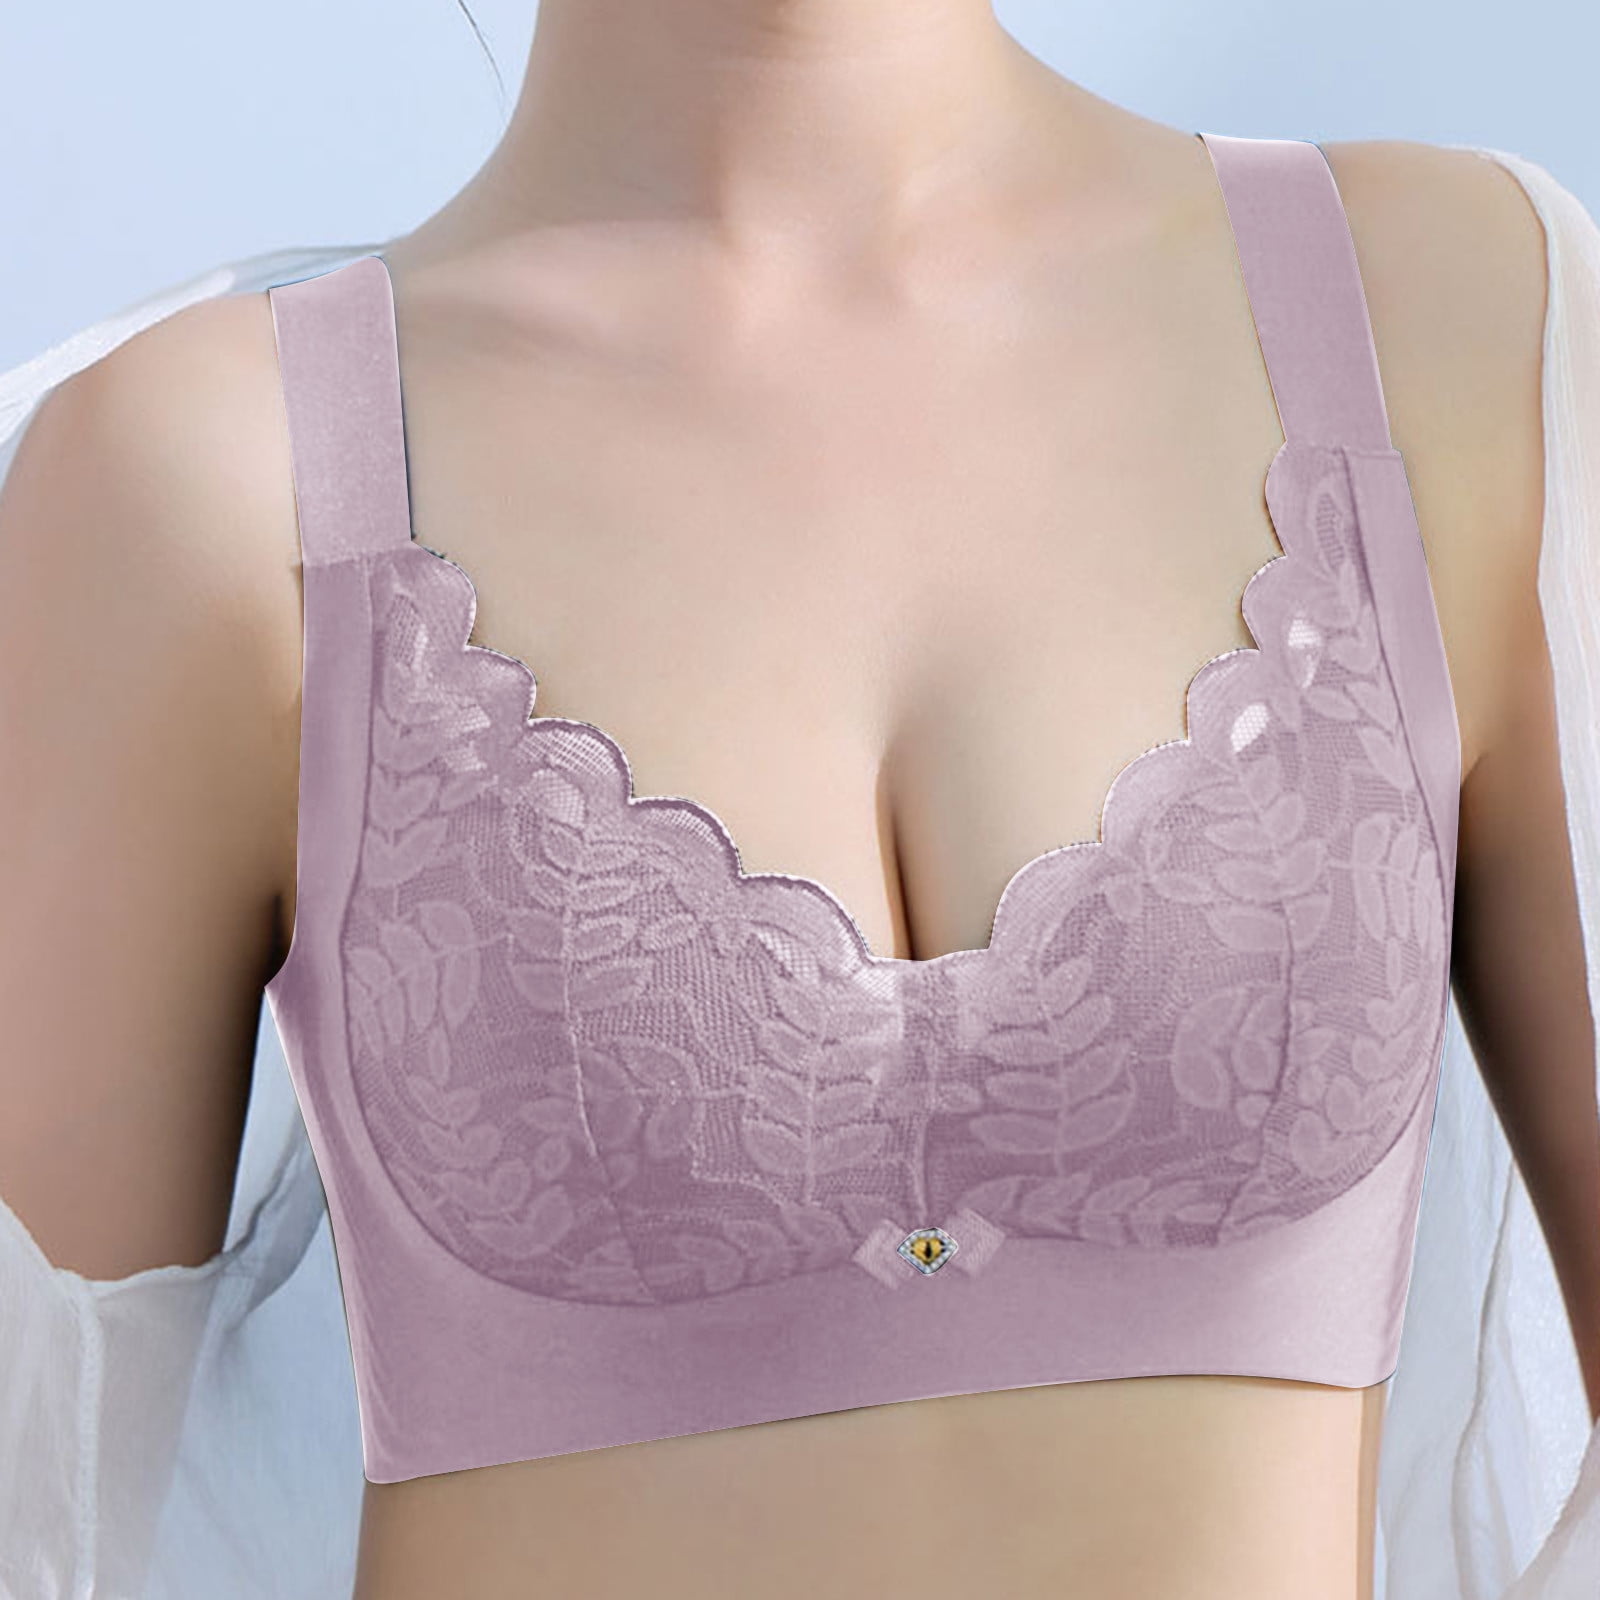 CAICJ98 Lingerie for Women Lift Wireless Bra, Wirefree Bra with Support,  Full-Coverage Wireless Bra for Everyday Comfort A,38/85E